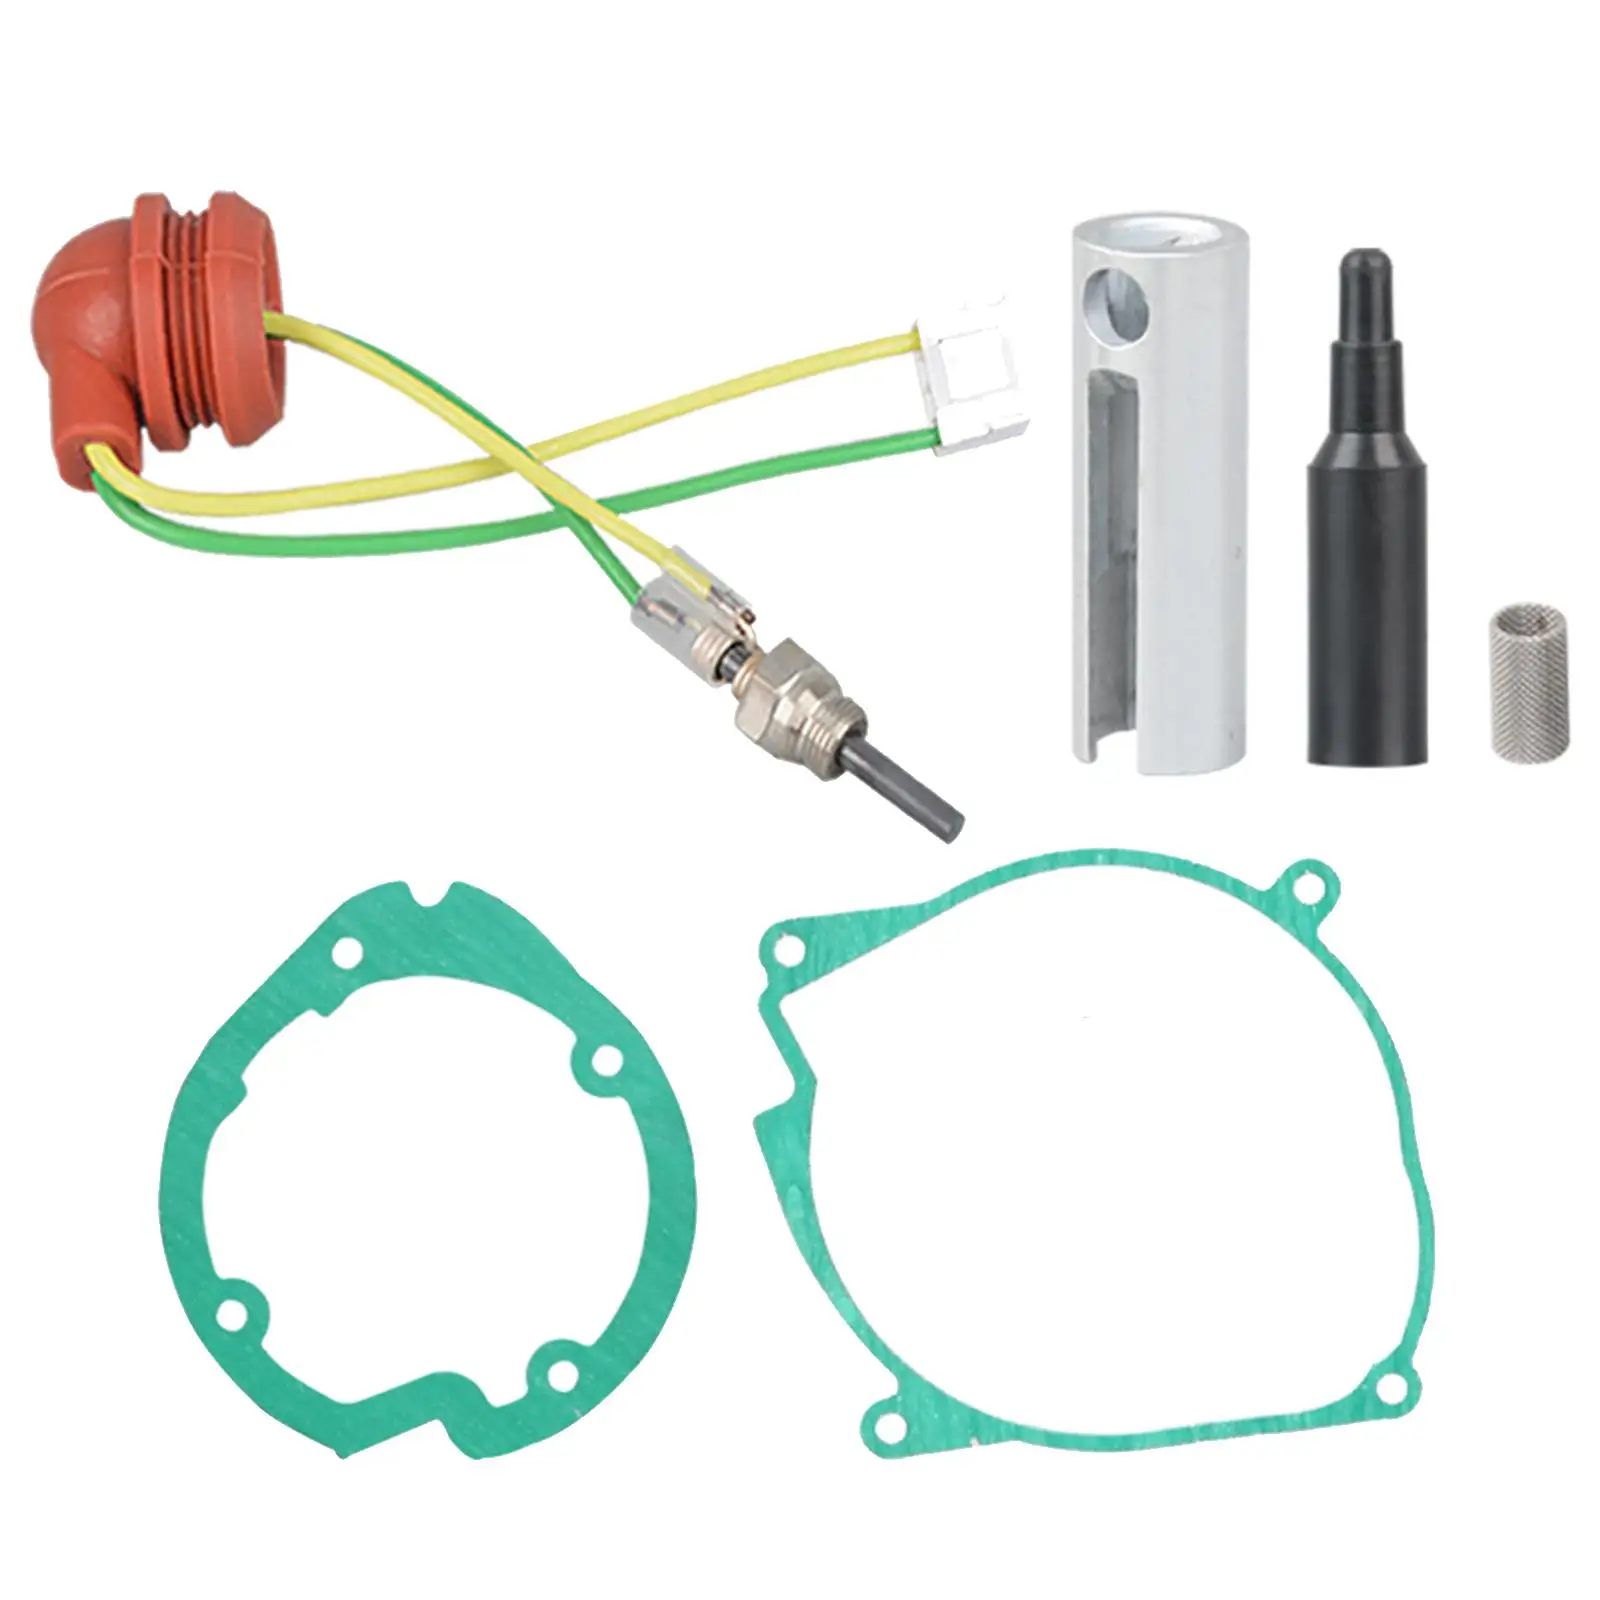 Glow Plug Repair Kit Accessory Parts Gasket for 12V 5kW Parking Heater